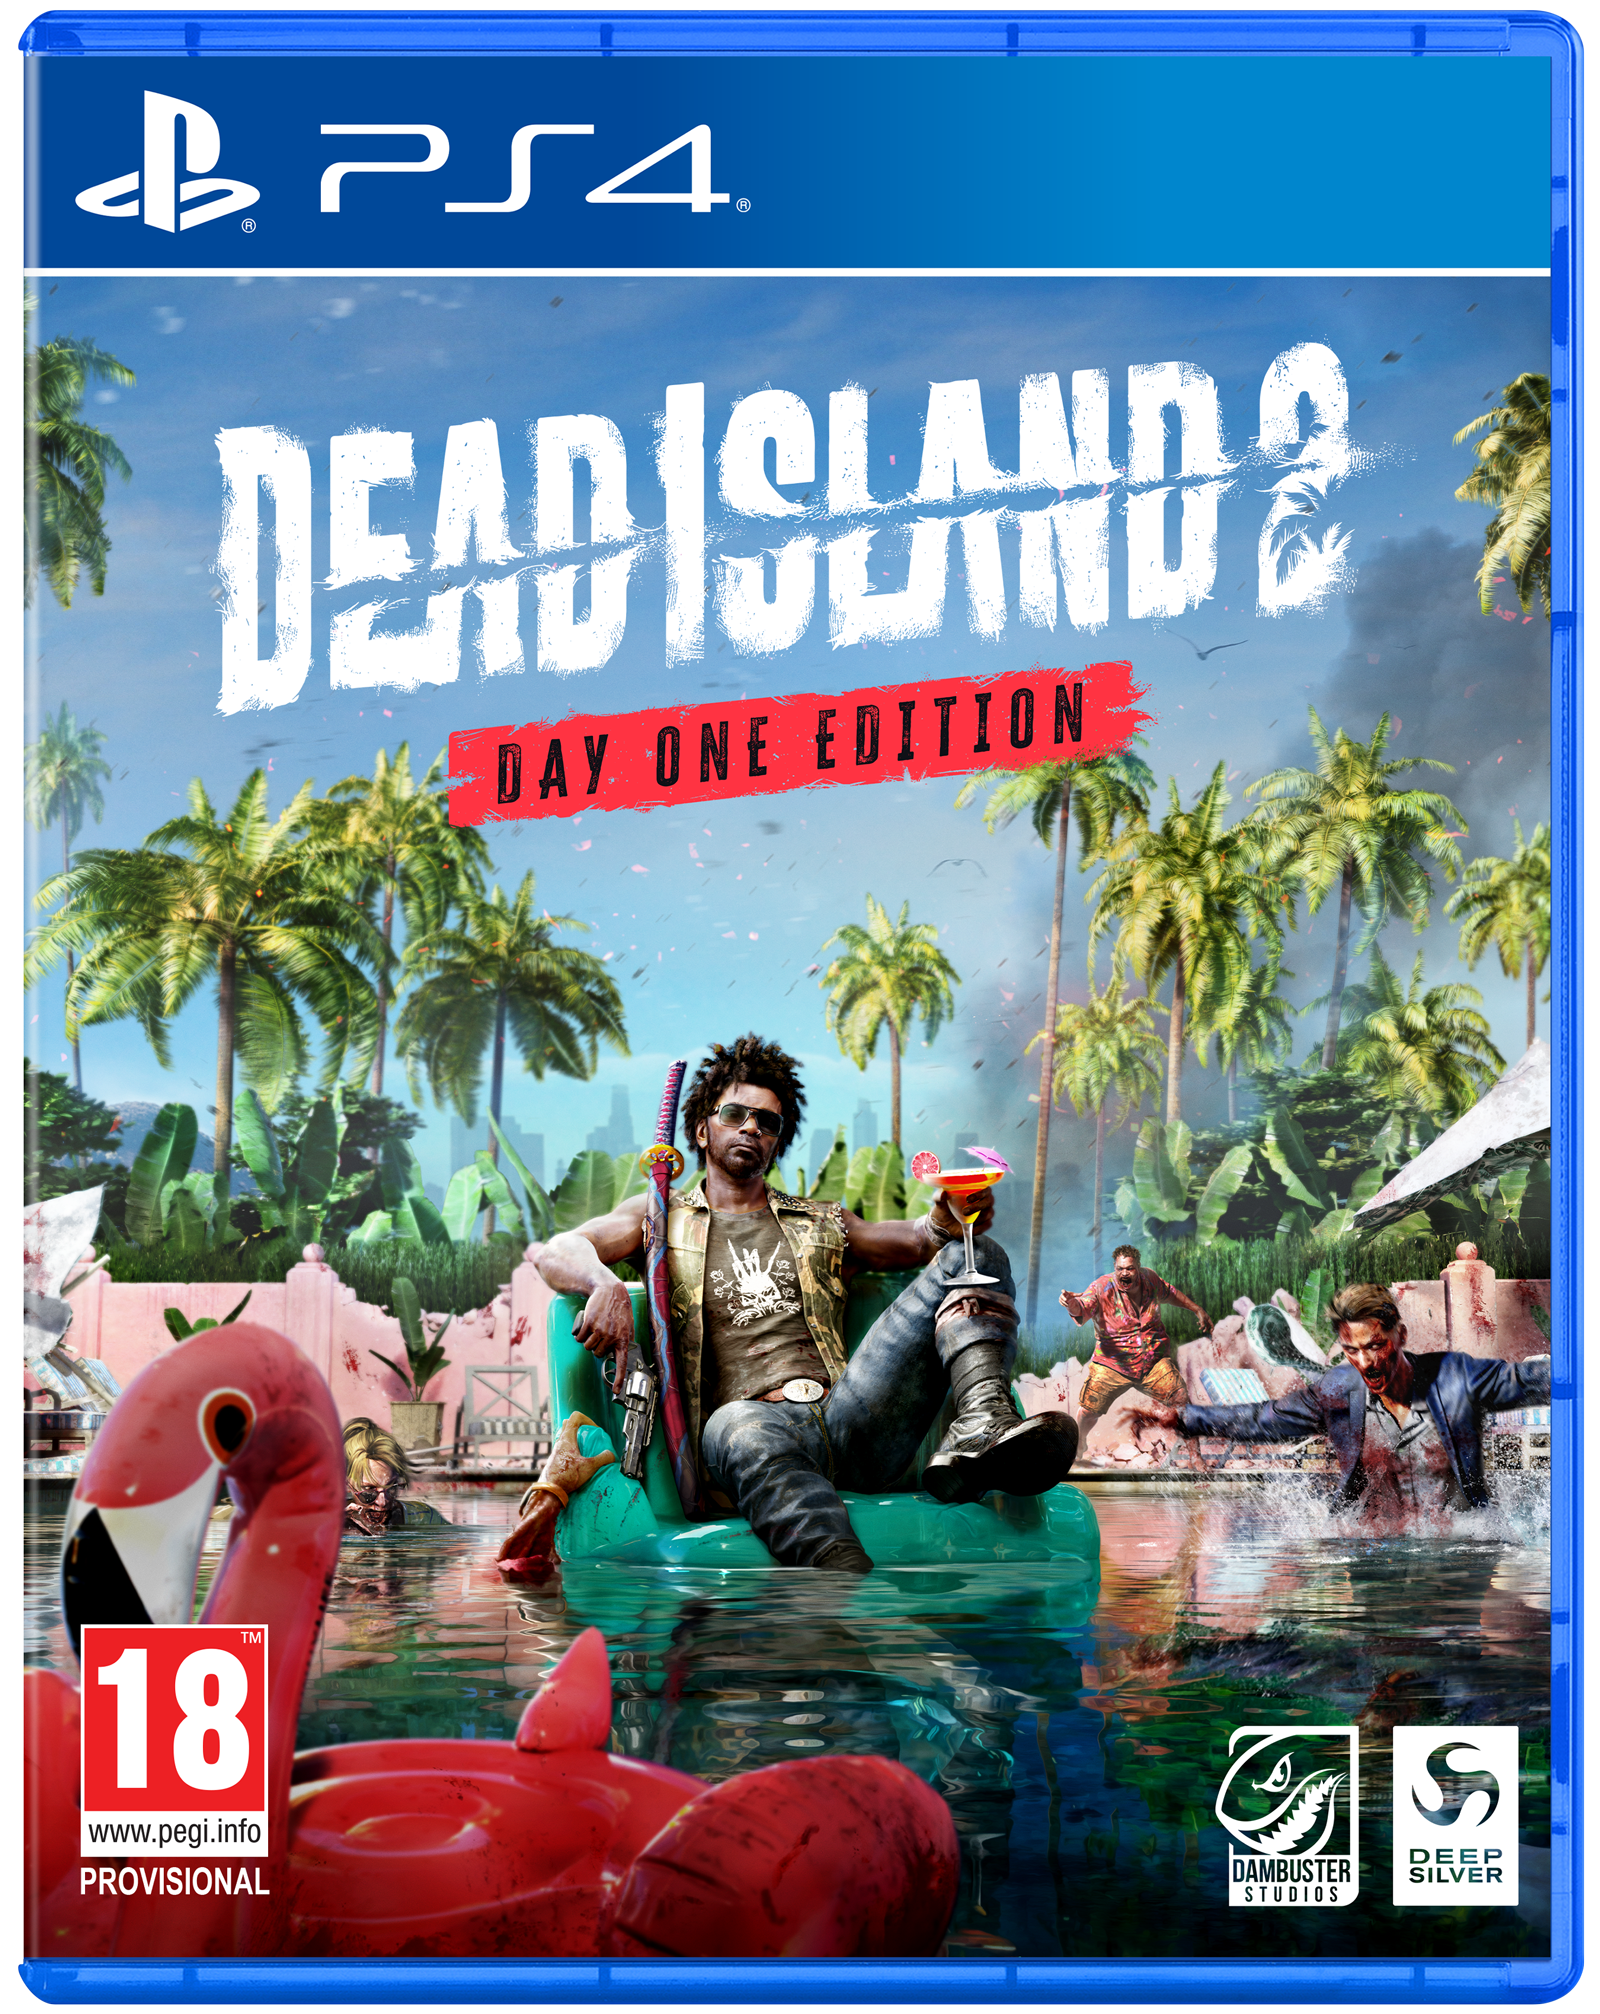 Dead Island 2 - Day One Edition kopen | PS4 GameResource